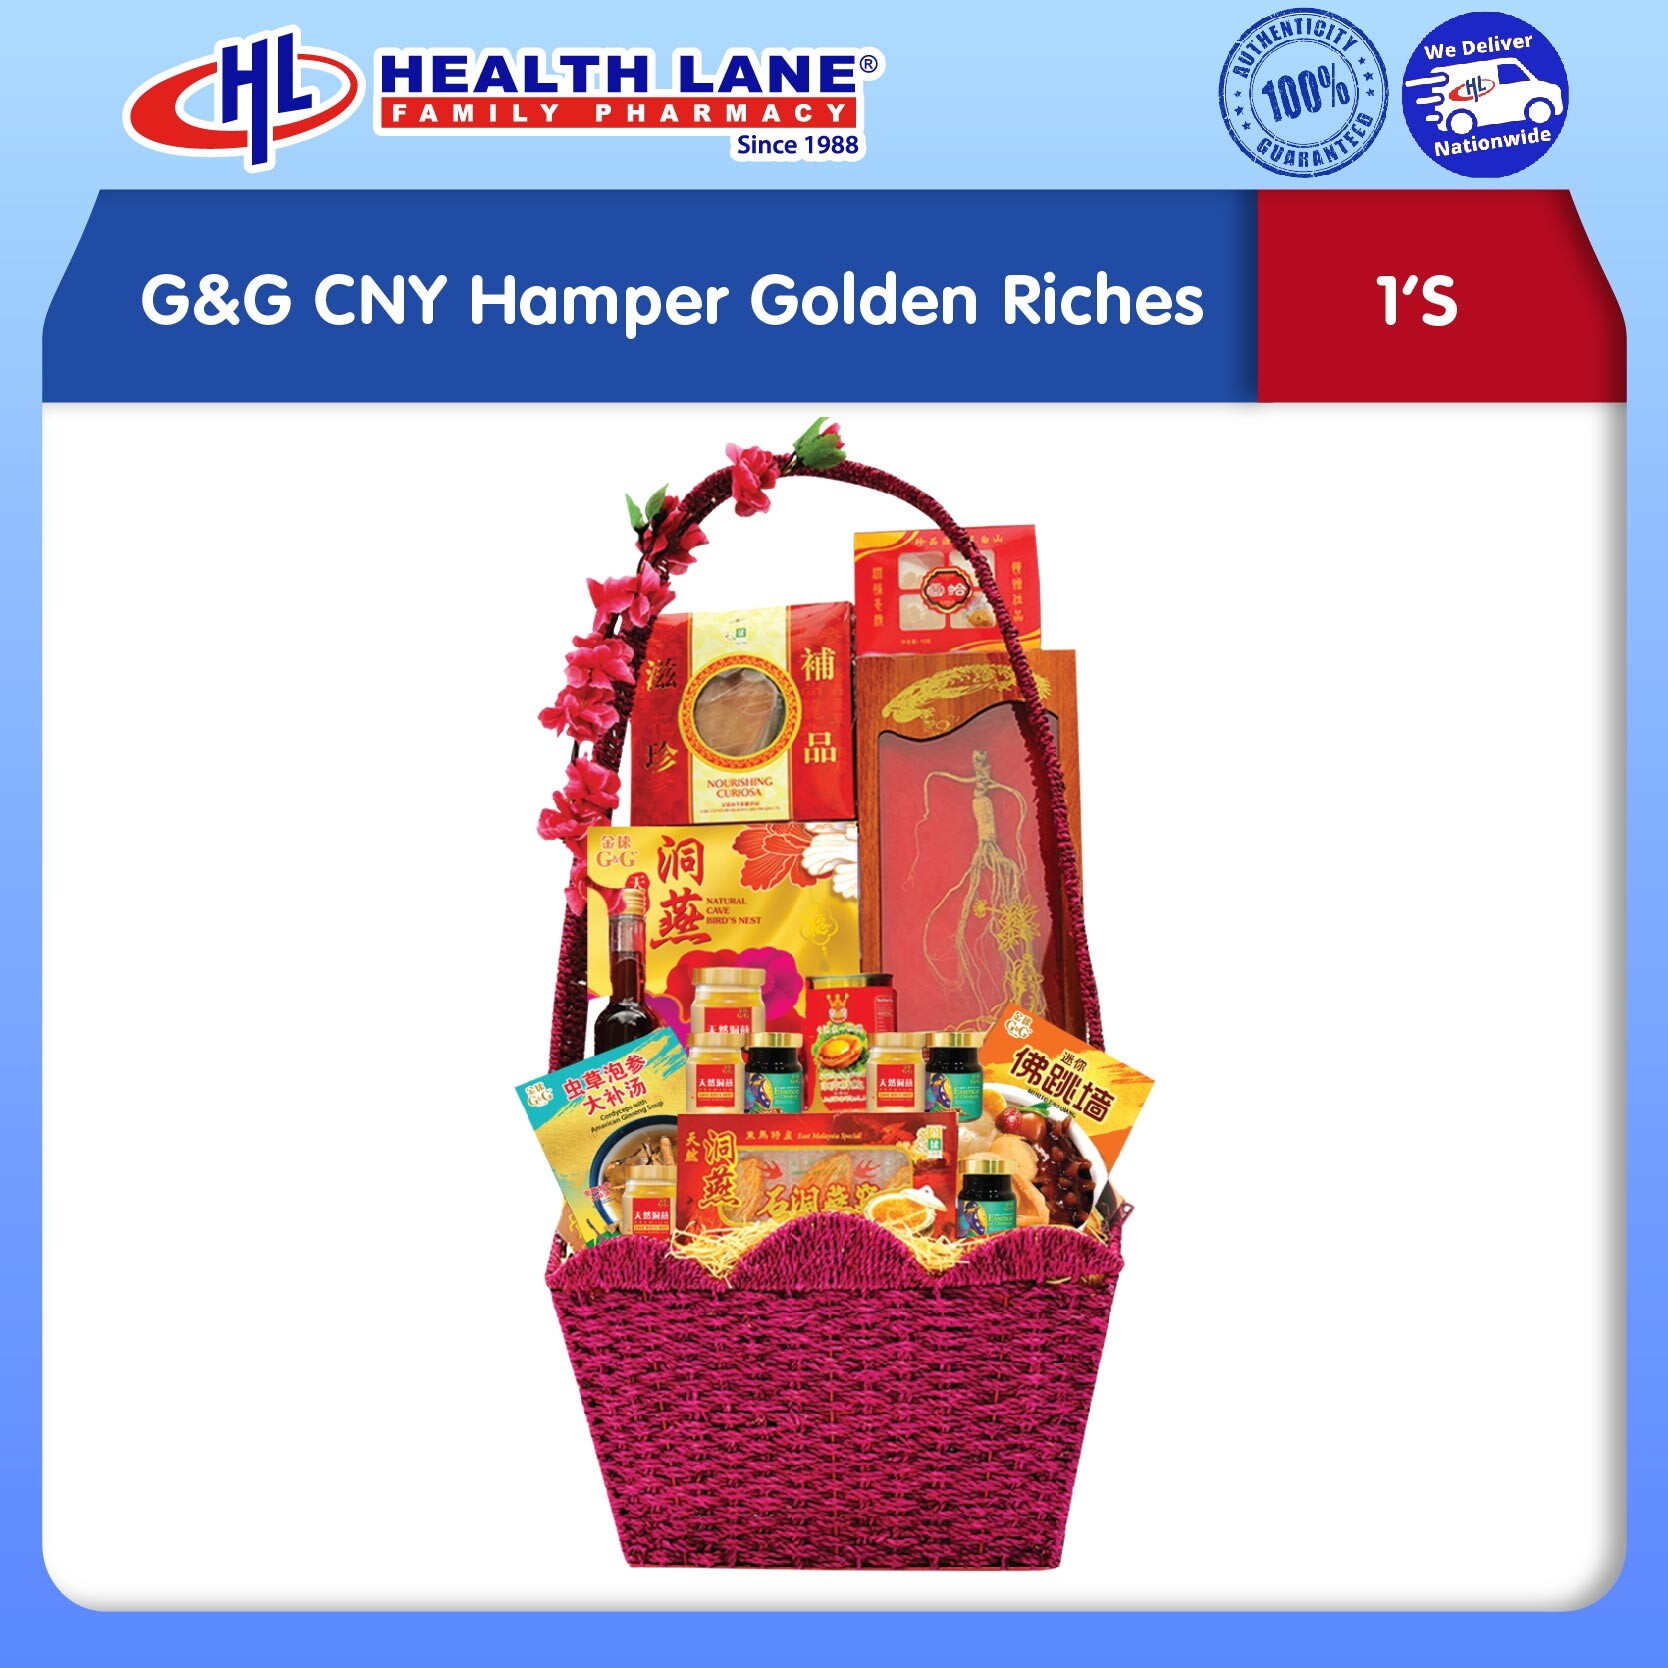 [PRE-ORDER] G&G CNY Hamper Golden Riches 金球新年礼篮: 黄金财富 [WEST-MALAYSIA ONLY]